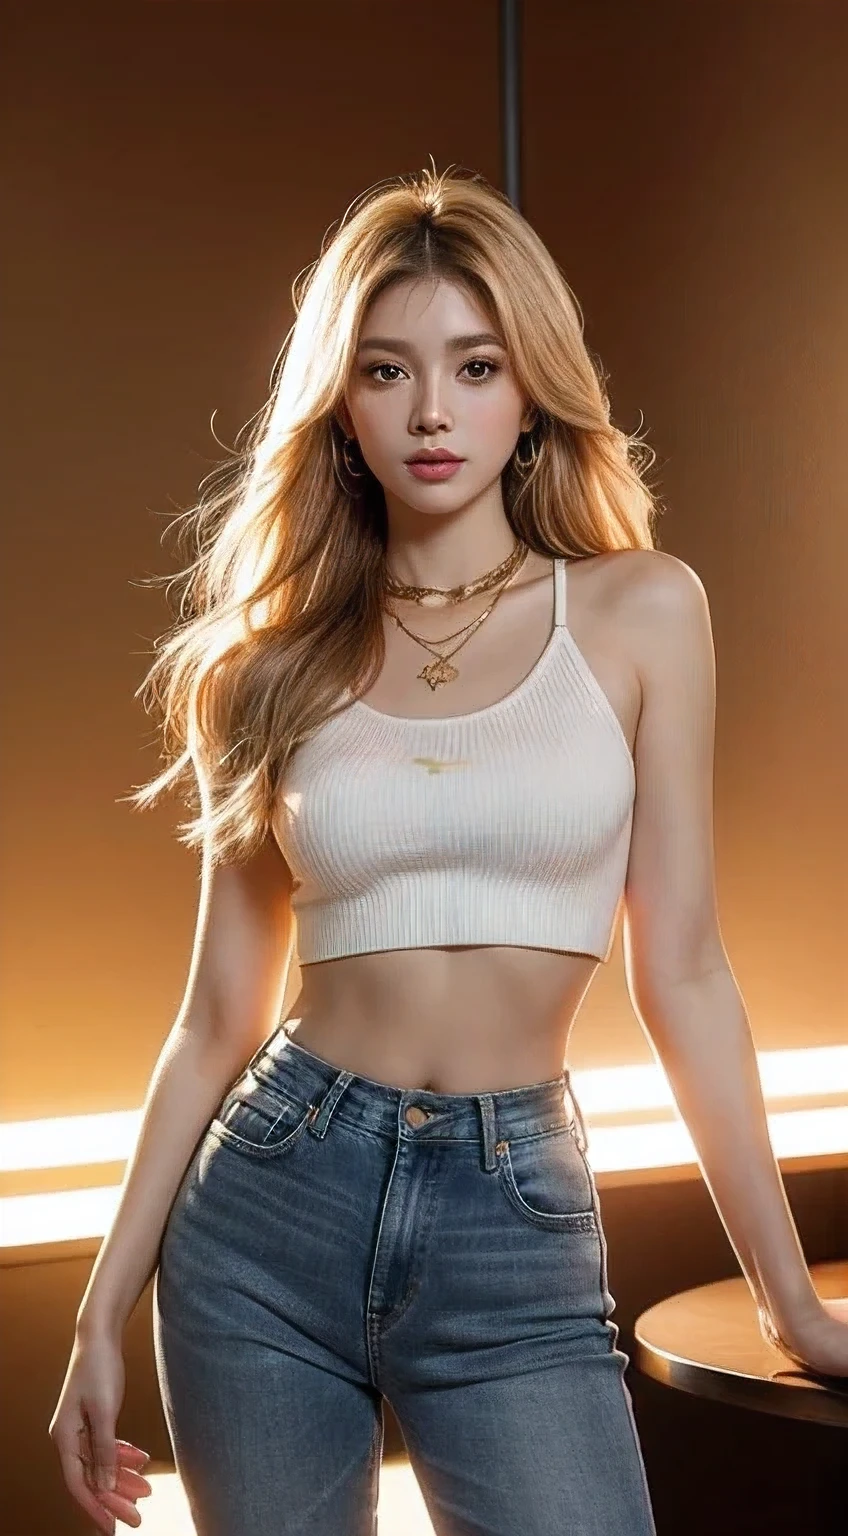 Generate a digital image of a beautiful woman with straight, honey blonde hair styled in a feathered cut. Capture her ((standing with arm crossed)) in a disco club, wearing high-waisted, light wash flare jeans with a frayed hem. Pair the jeans with a burnt orange, silky crop top and a long, gold chain necklace. The background should be a vibrant, retro disco scene with a mirrored disco ball reflecting colorful lights. Use a dynamic shot. Enhance the image with a warm, saturated color palette reminiscent of the 70s and a subtle grain effect for a vintage feel.